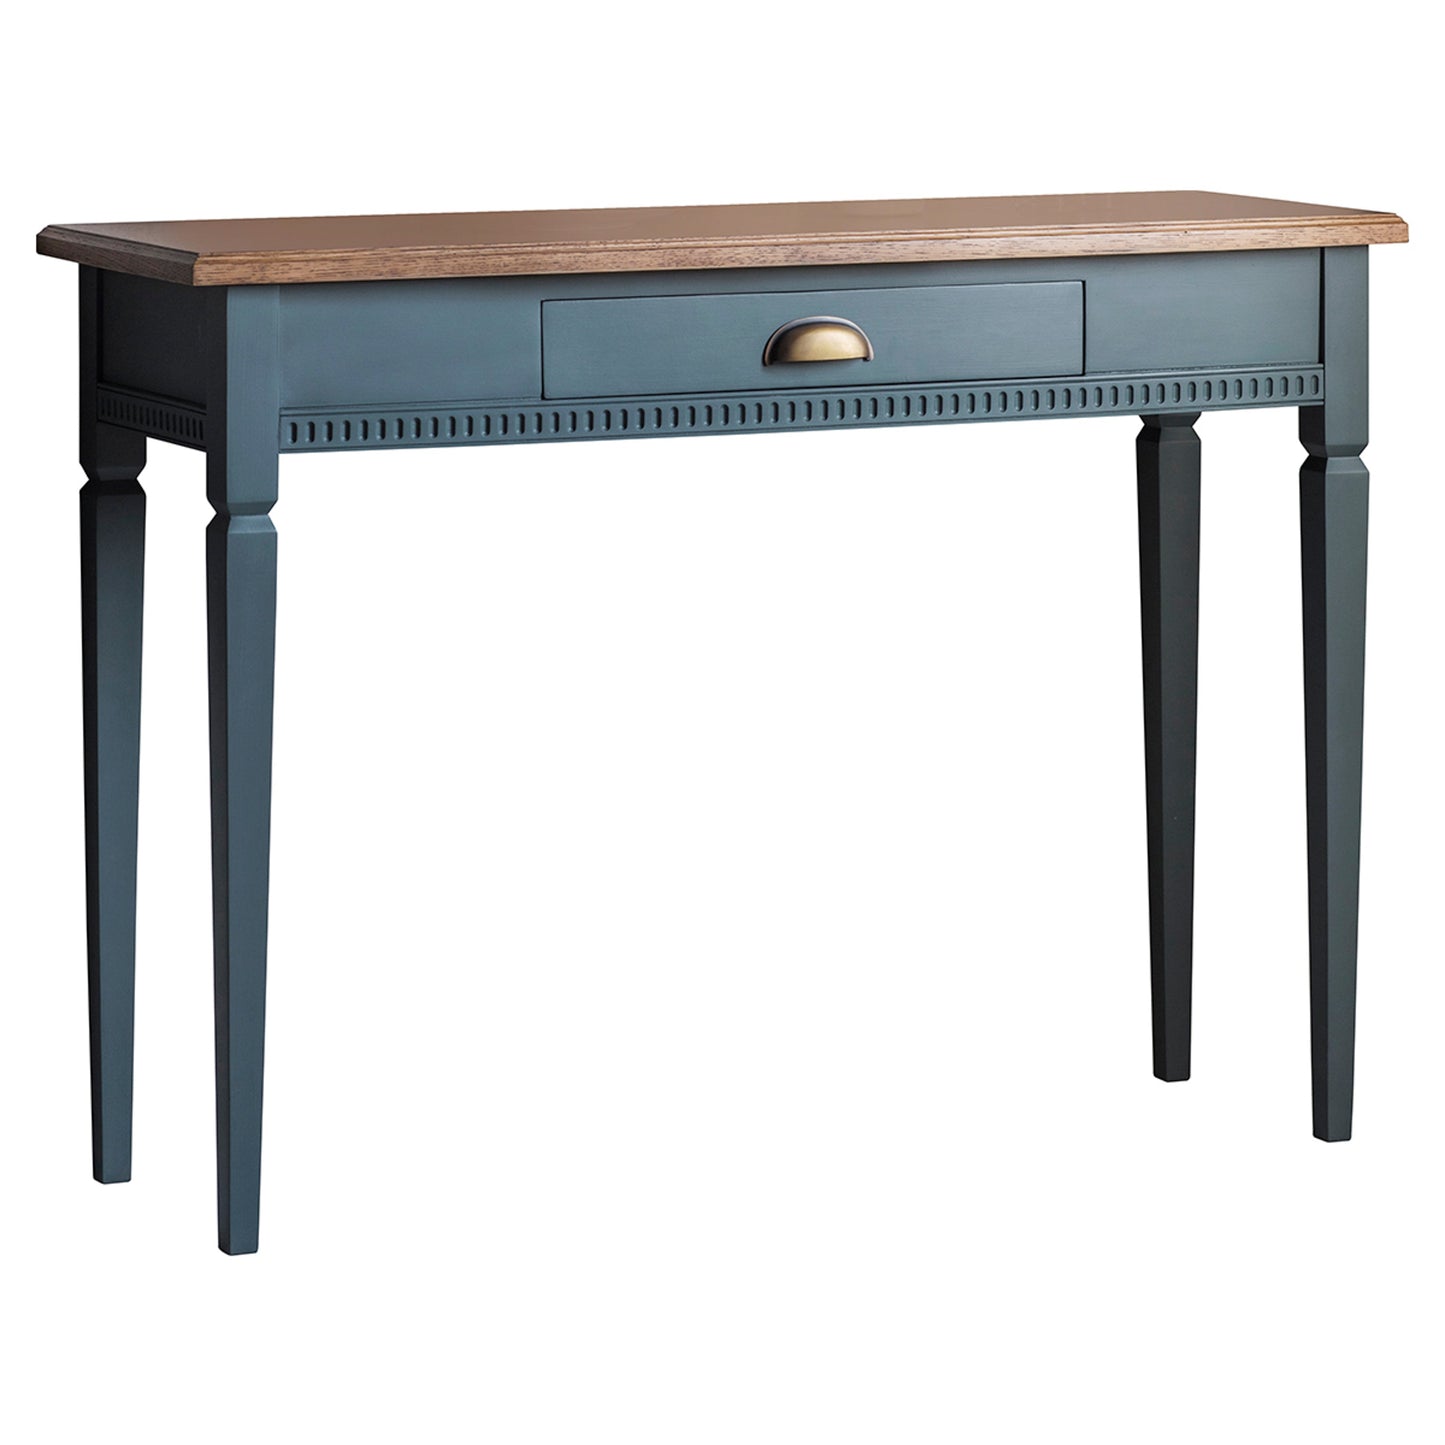 Bronte 1 Drawer Console Table Storm 1100x380x800mm